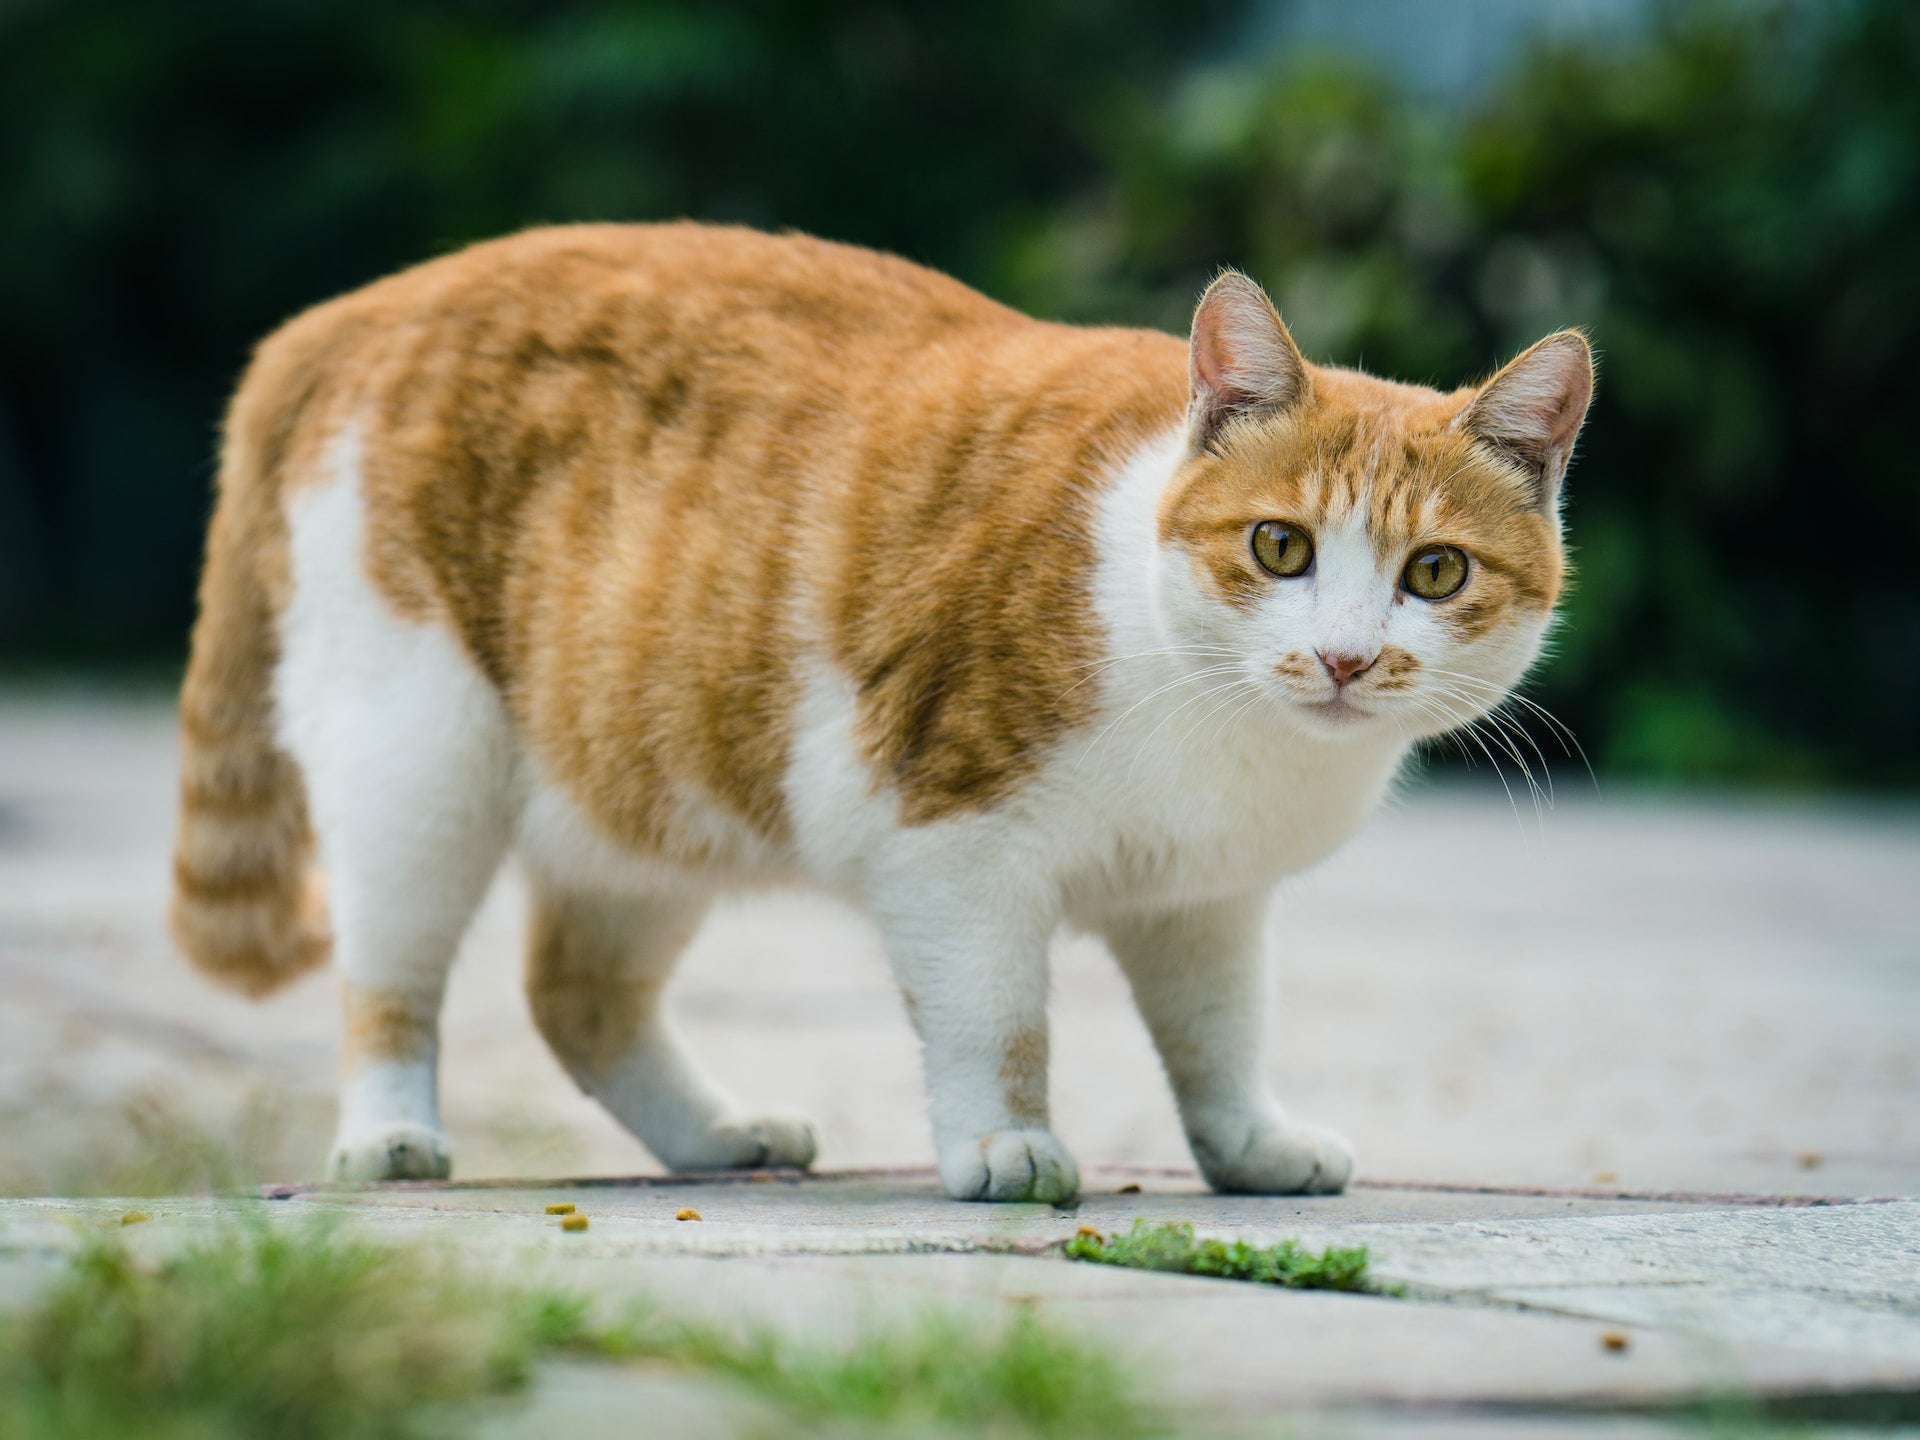 How to help cats lose weight – Our 6 top tips